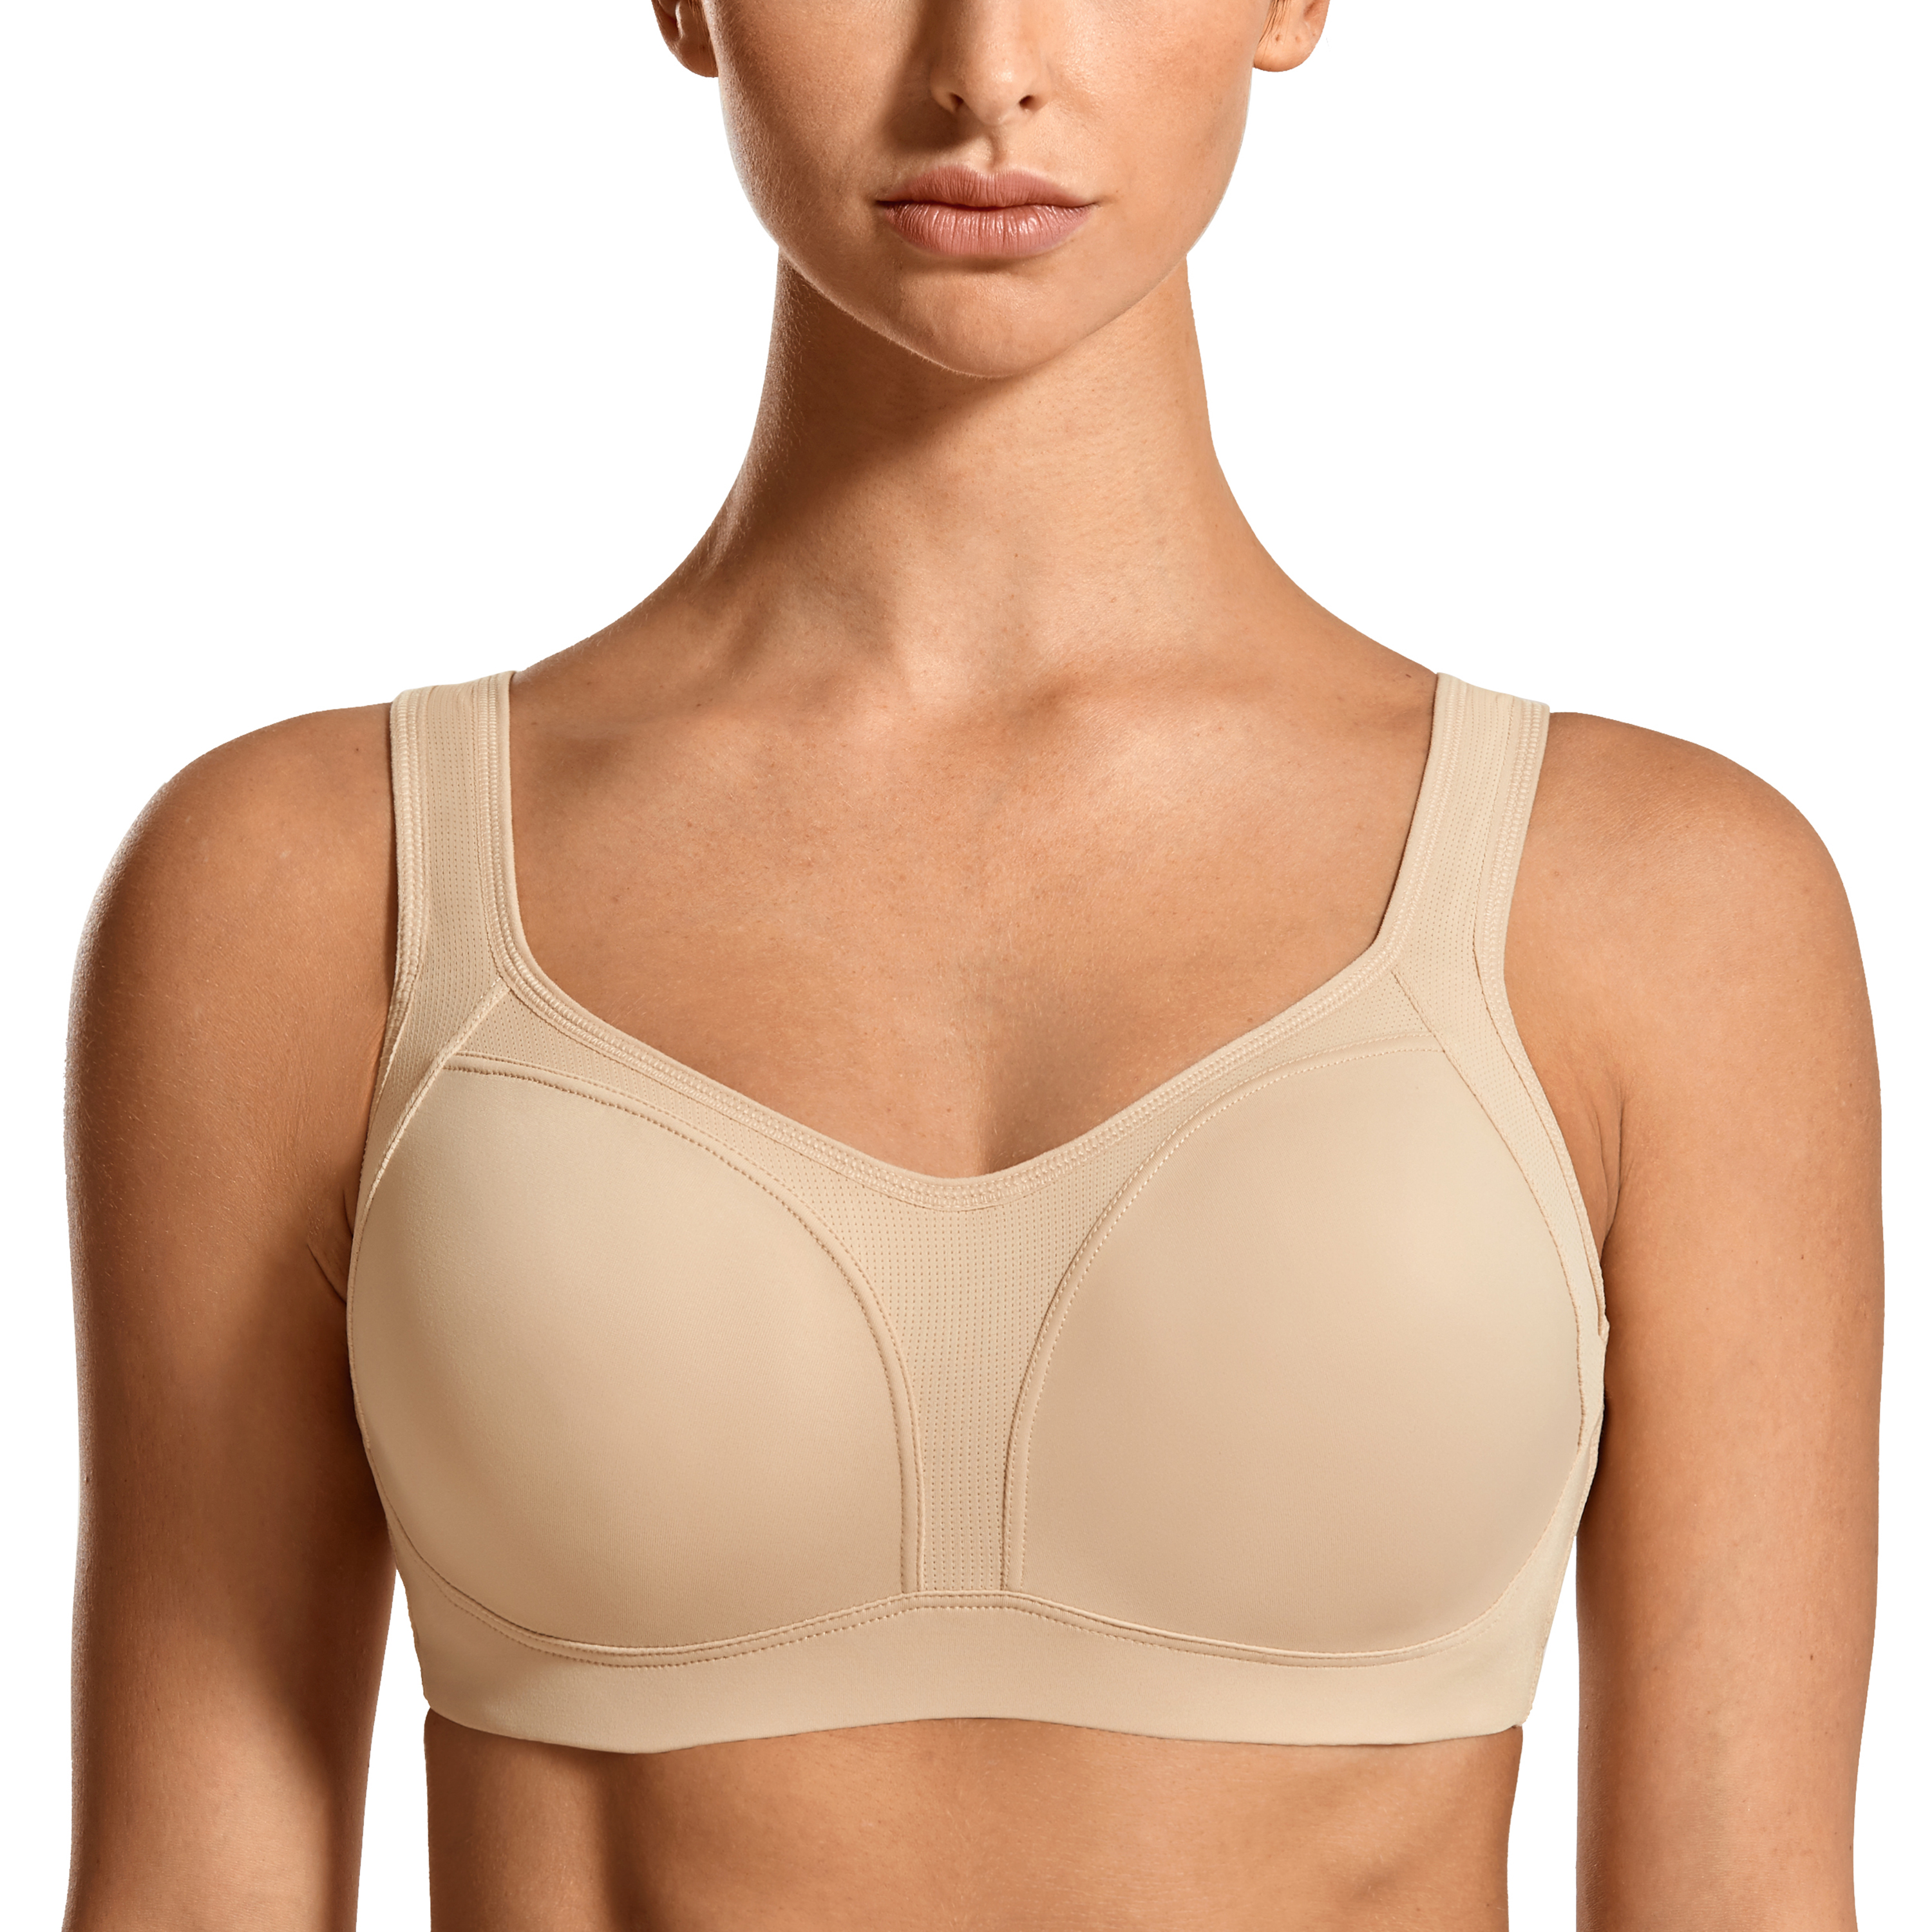 SYROKAN Women's High Impact Sports Bra Underwire Firm Support Contour Padded